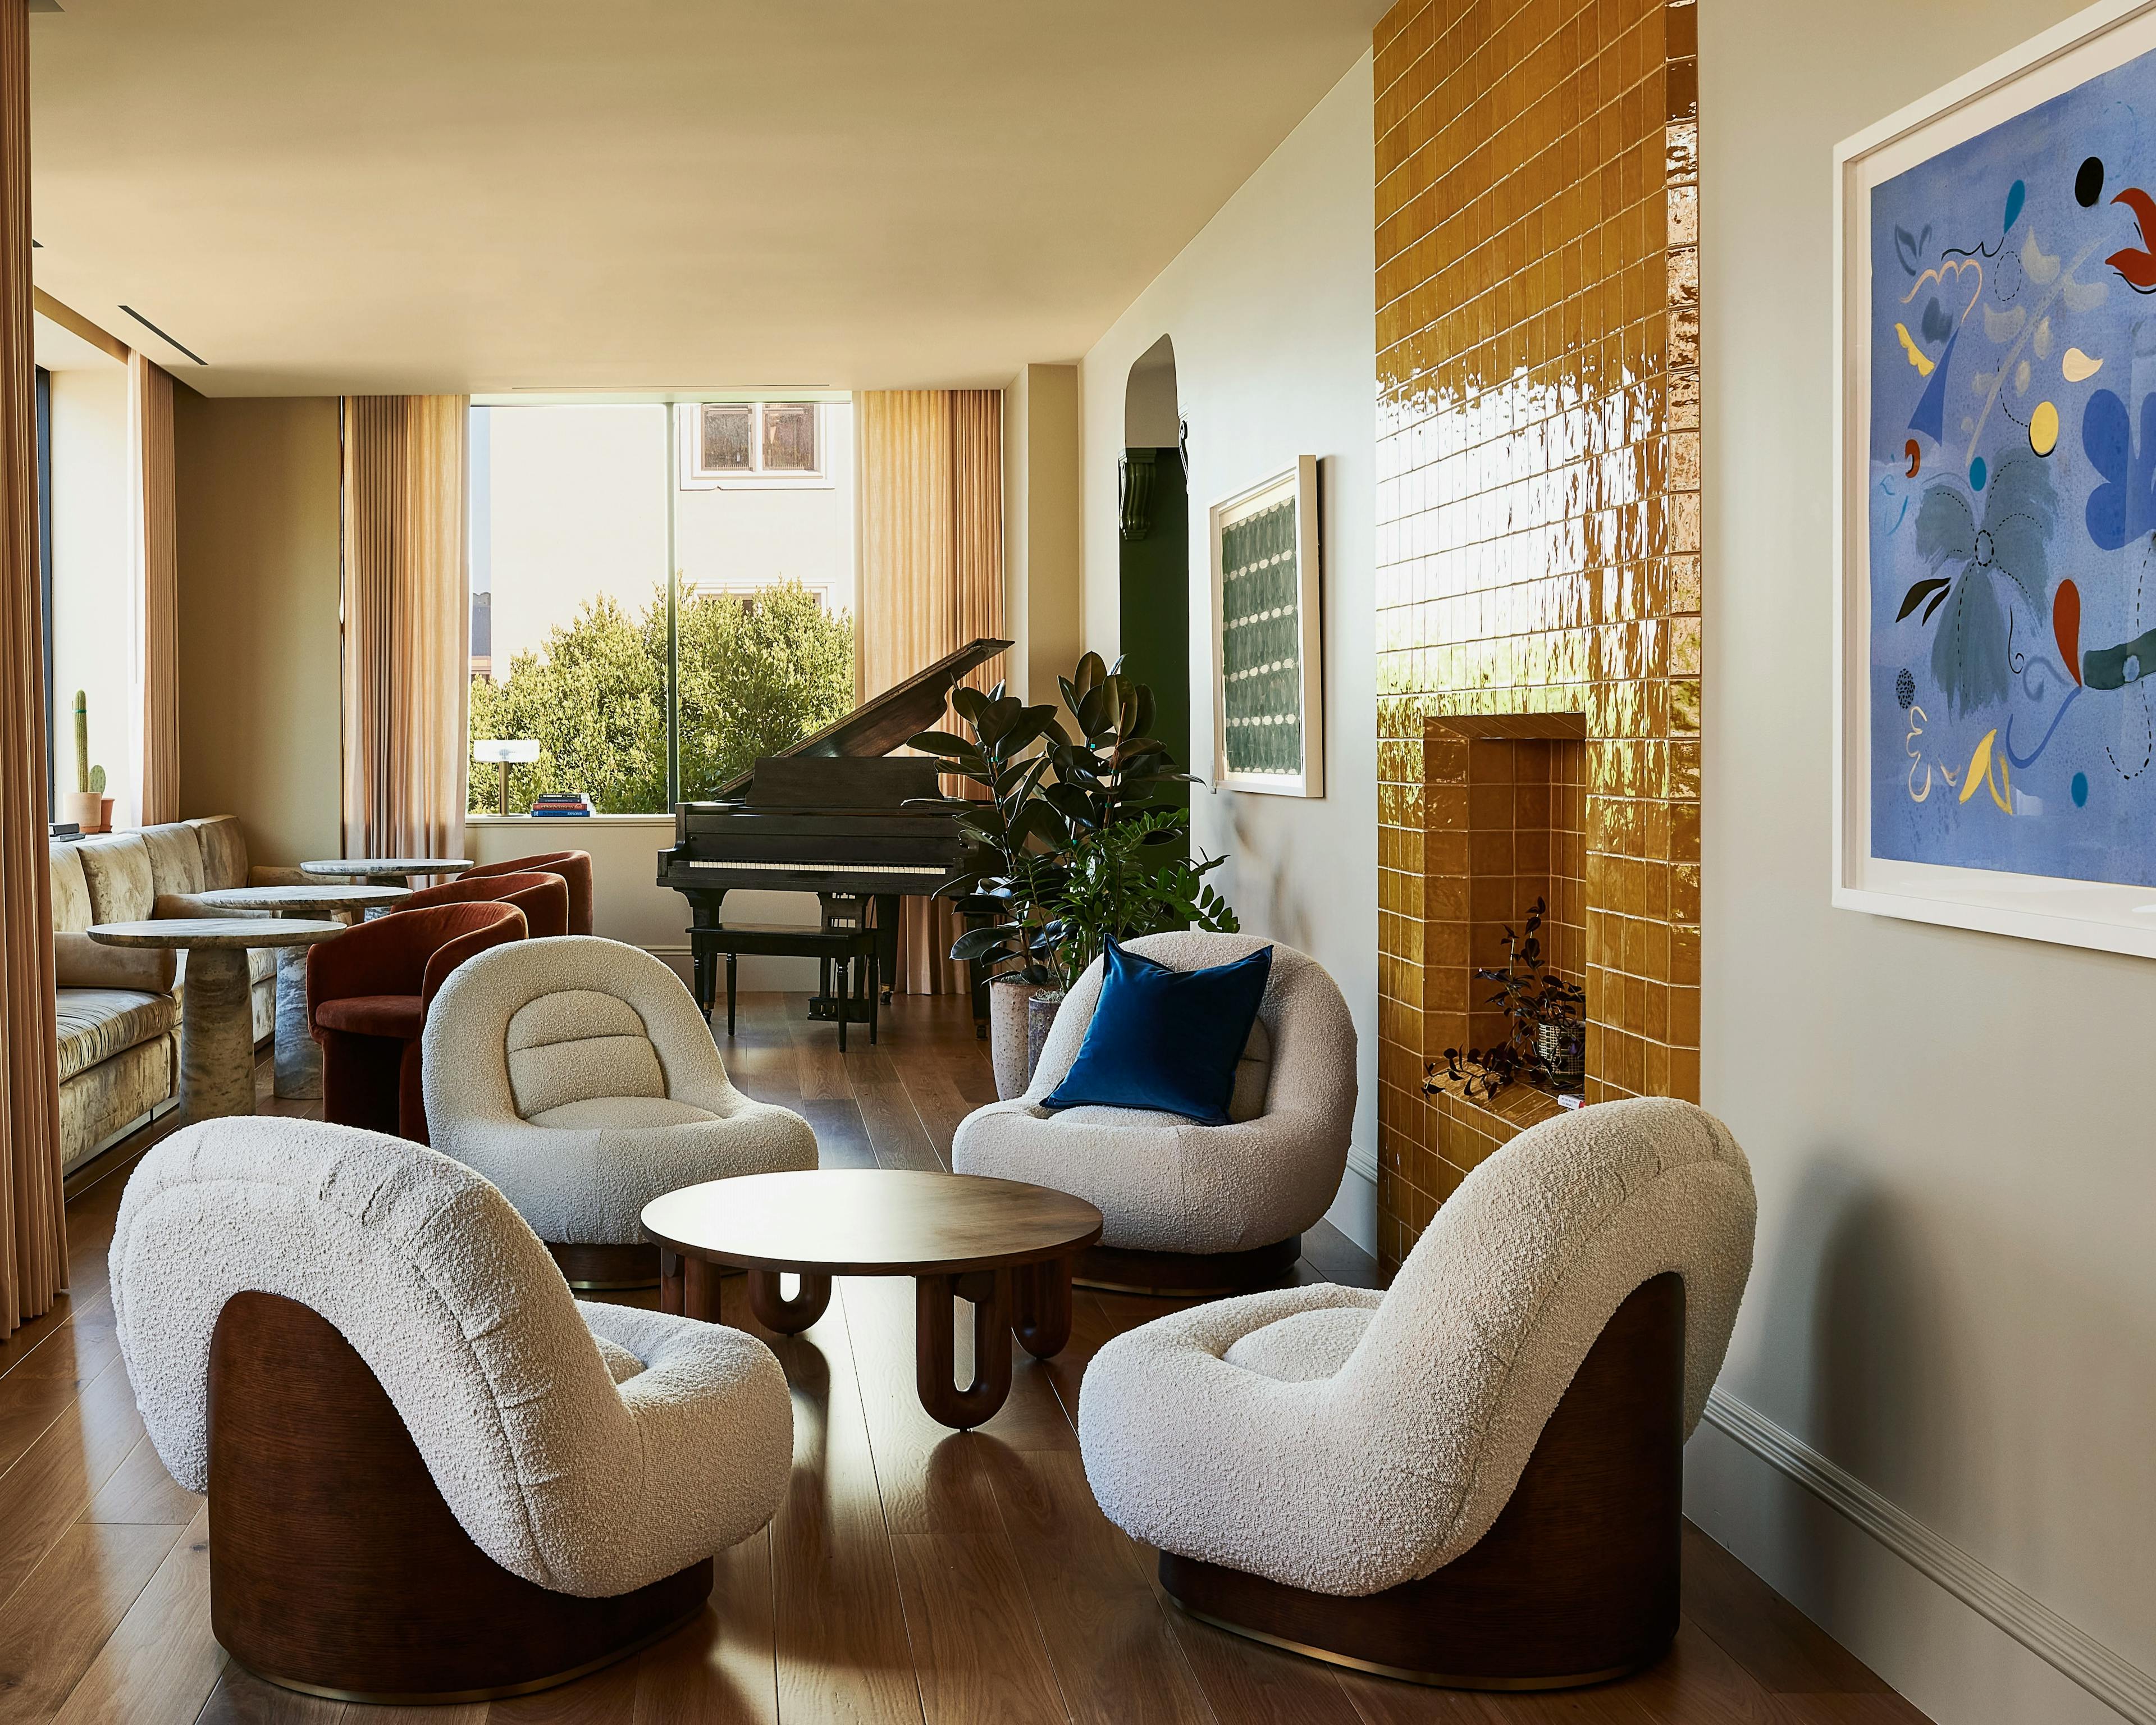 A blue floral painting by artist Kayla Plosz Antiel and geometric artwork by artist Katrine Hildebrandt-Hussey installed in a lounge area at the Chief San Francisco Clubhouse with four arm chairs and a baby grand piano in the back.